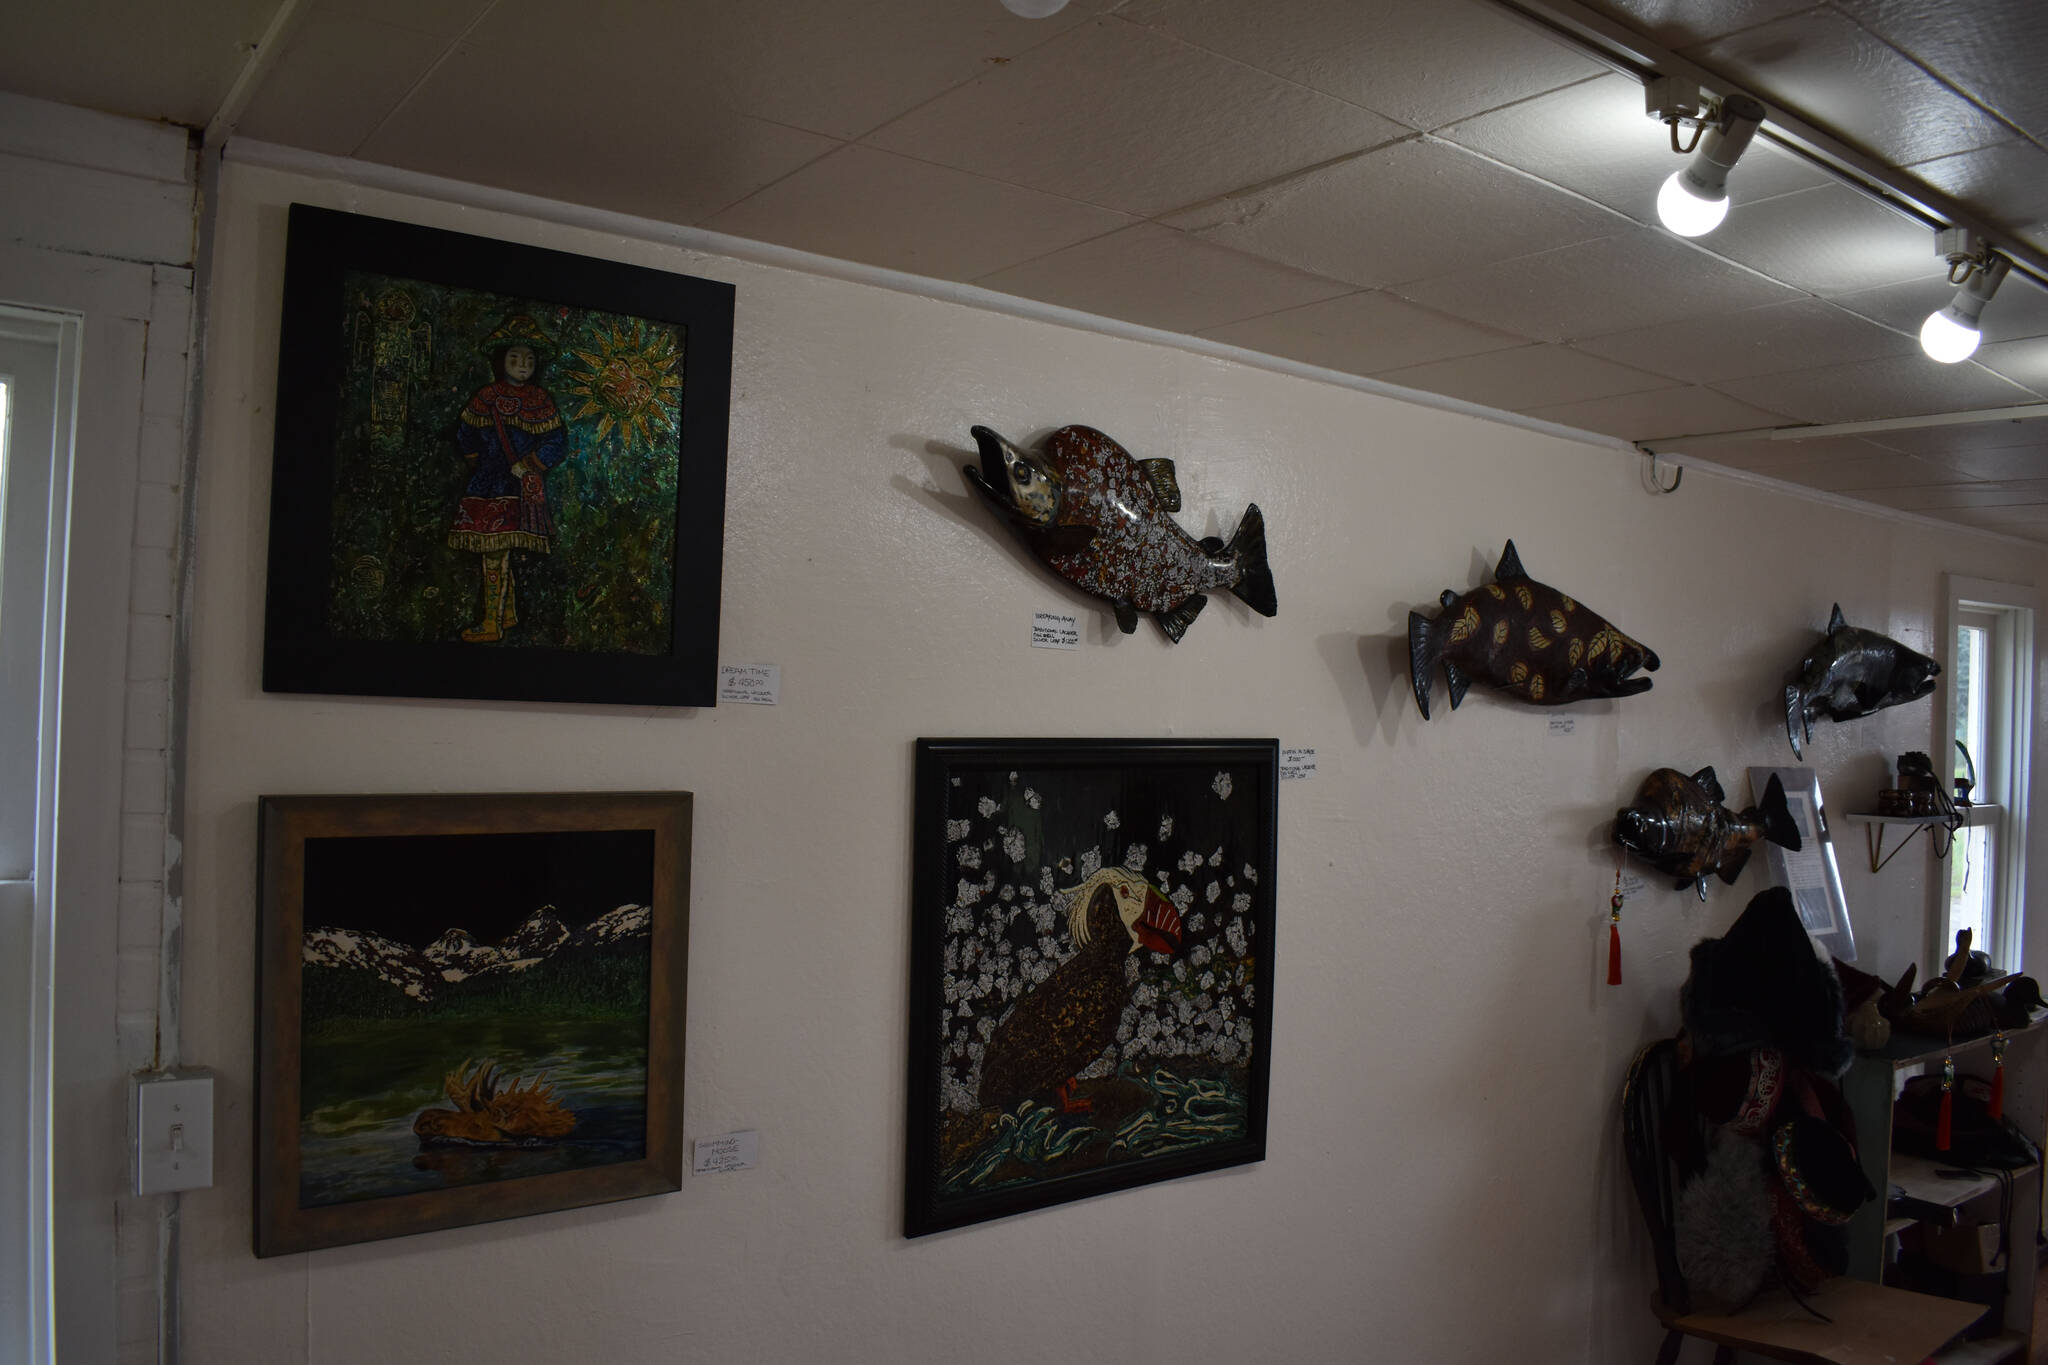 Art hangs on the walls and is otherwise displayed at Kathy Matta’s gallery in Soldotna, Alaska, on Wednesday, Sept. 7, 2022. (Jake Dye/Peninsula Clarion)